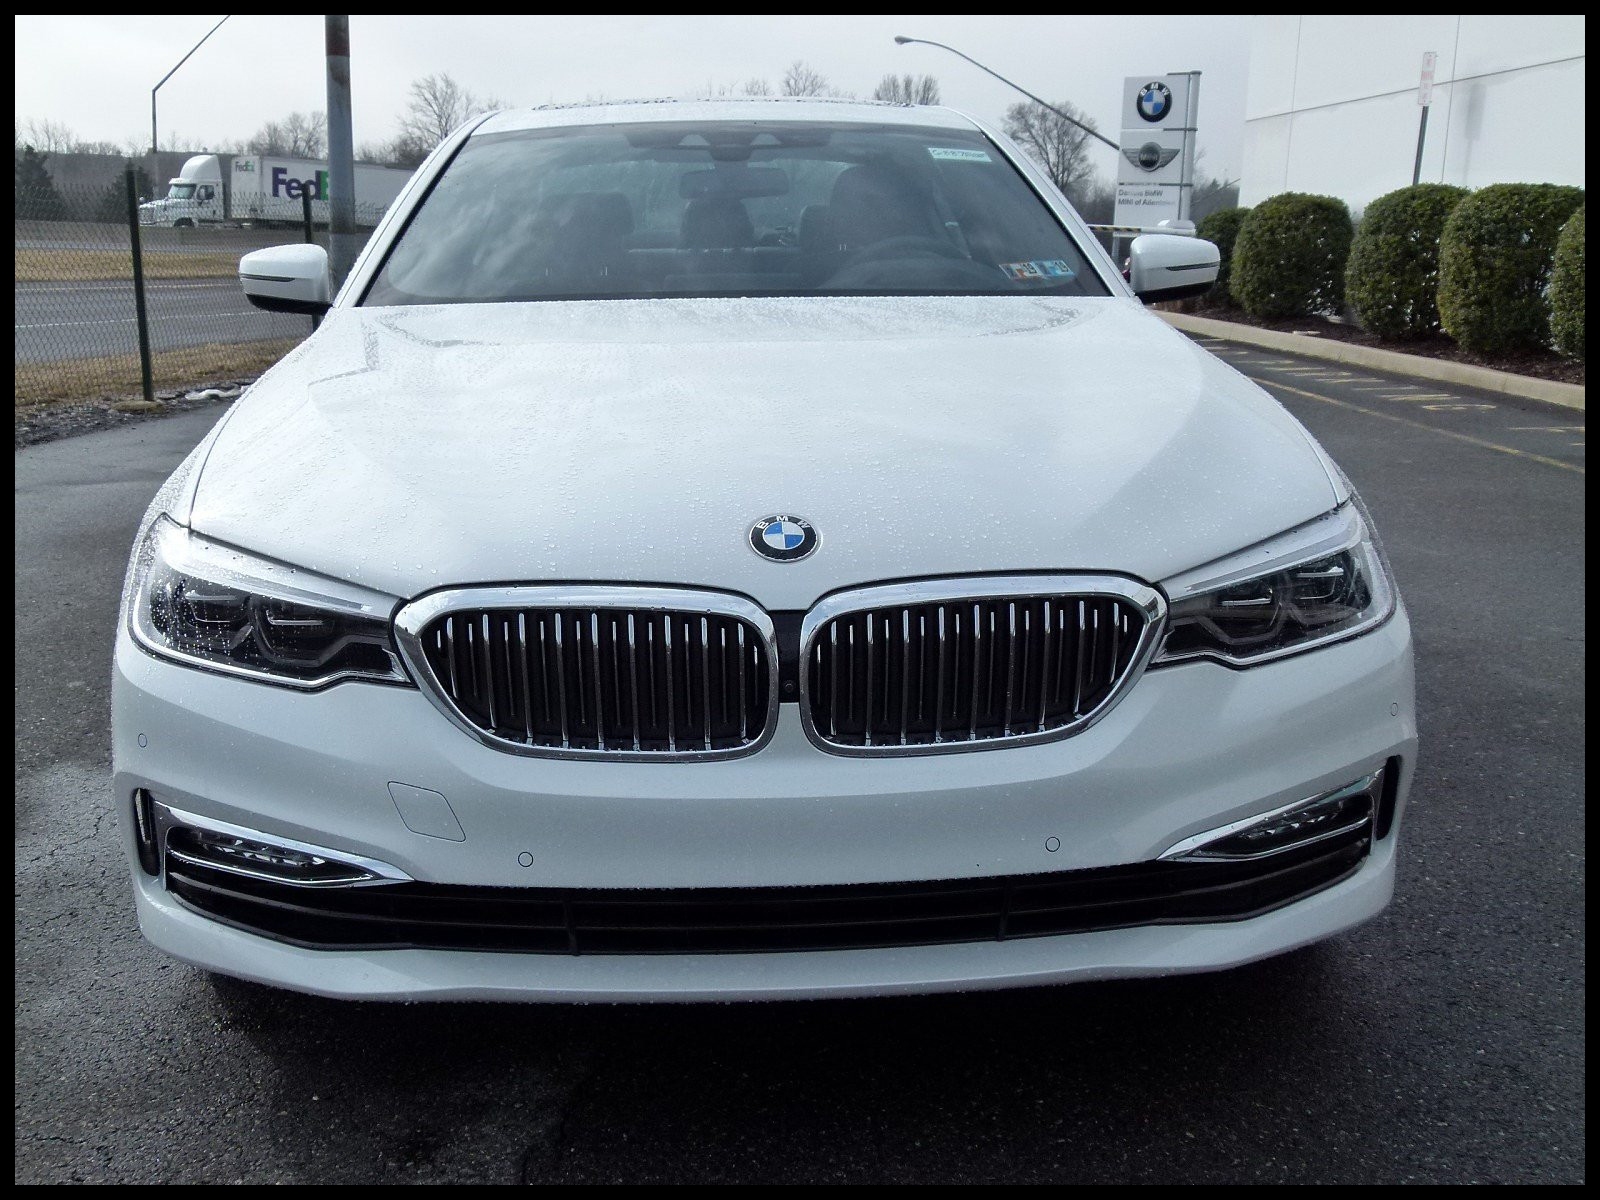 2017 Bmw 540i 0 60 Lovely Pre Owned 2017 Bmw 5 Series 540i Xdrive 4dr Car